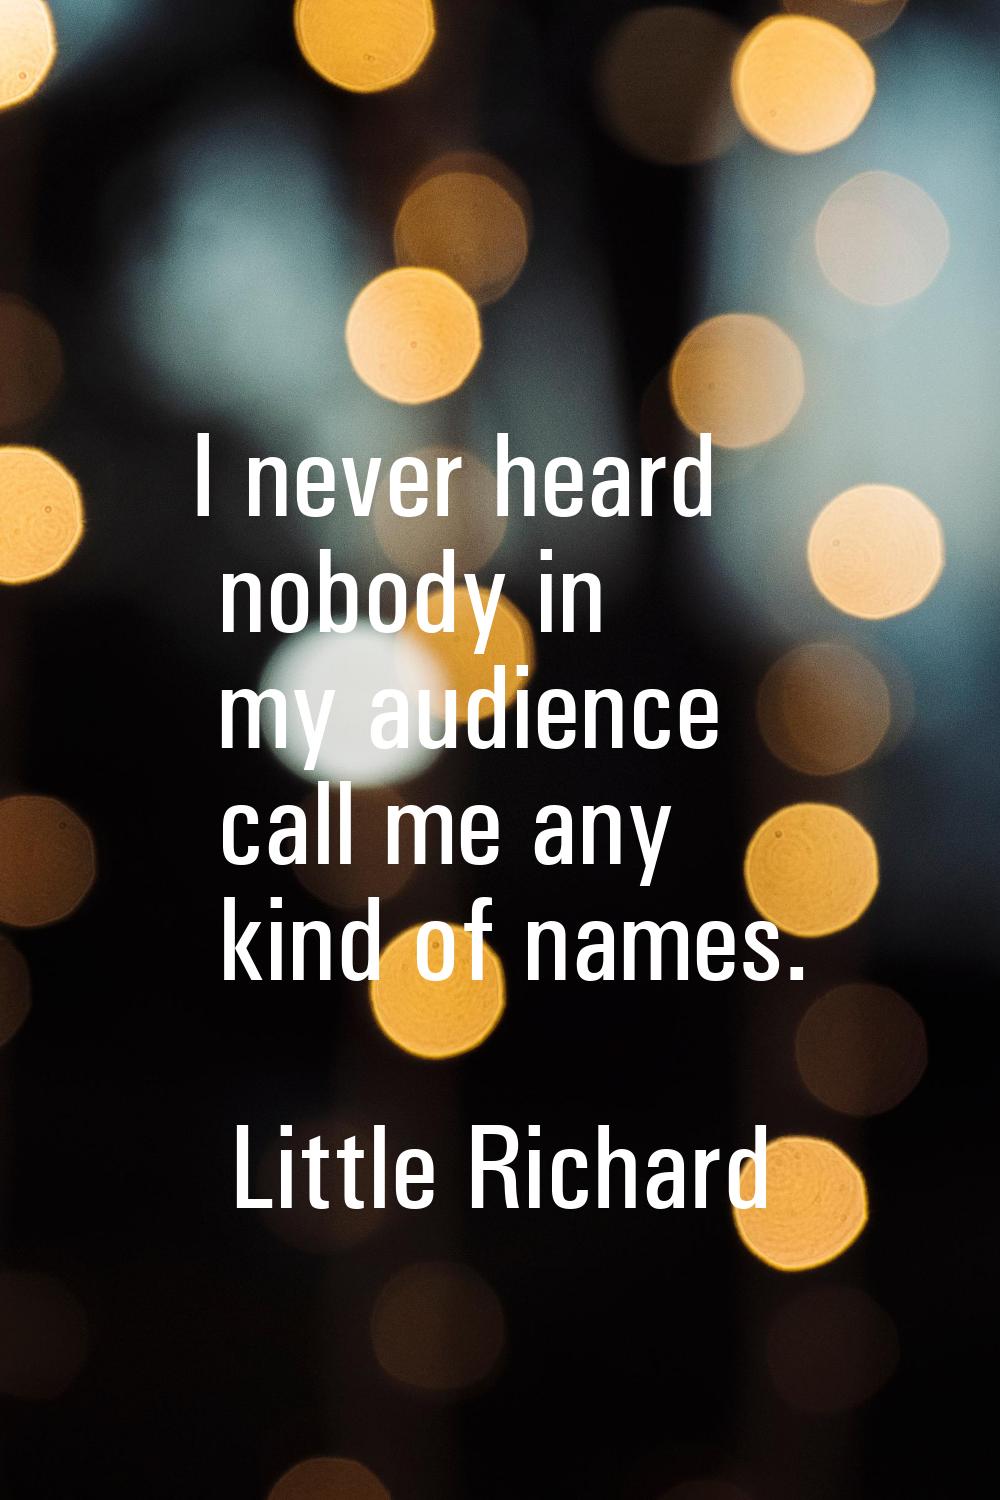 I never heard nobody in my audience call me any kind of names.